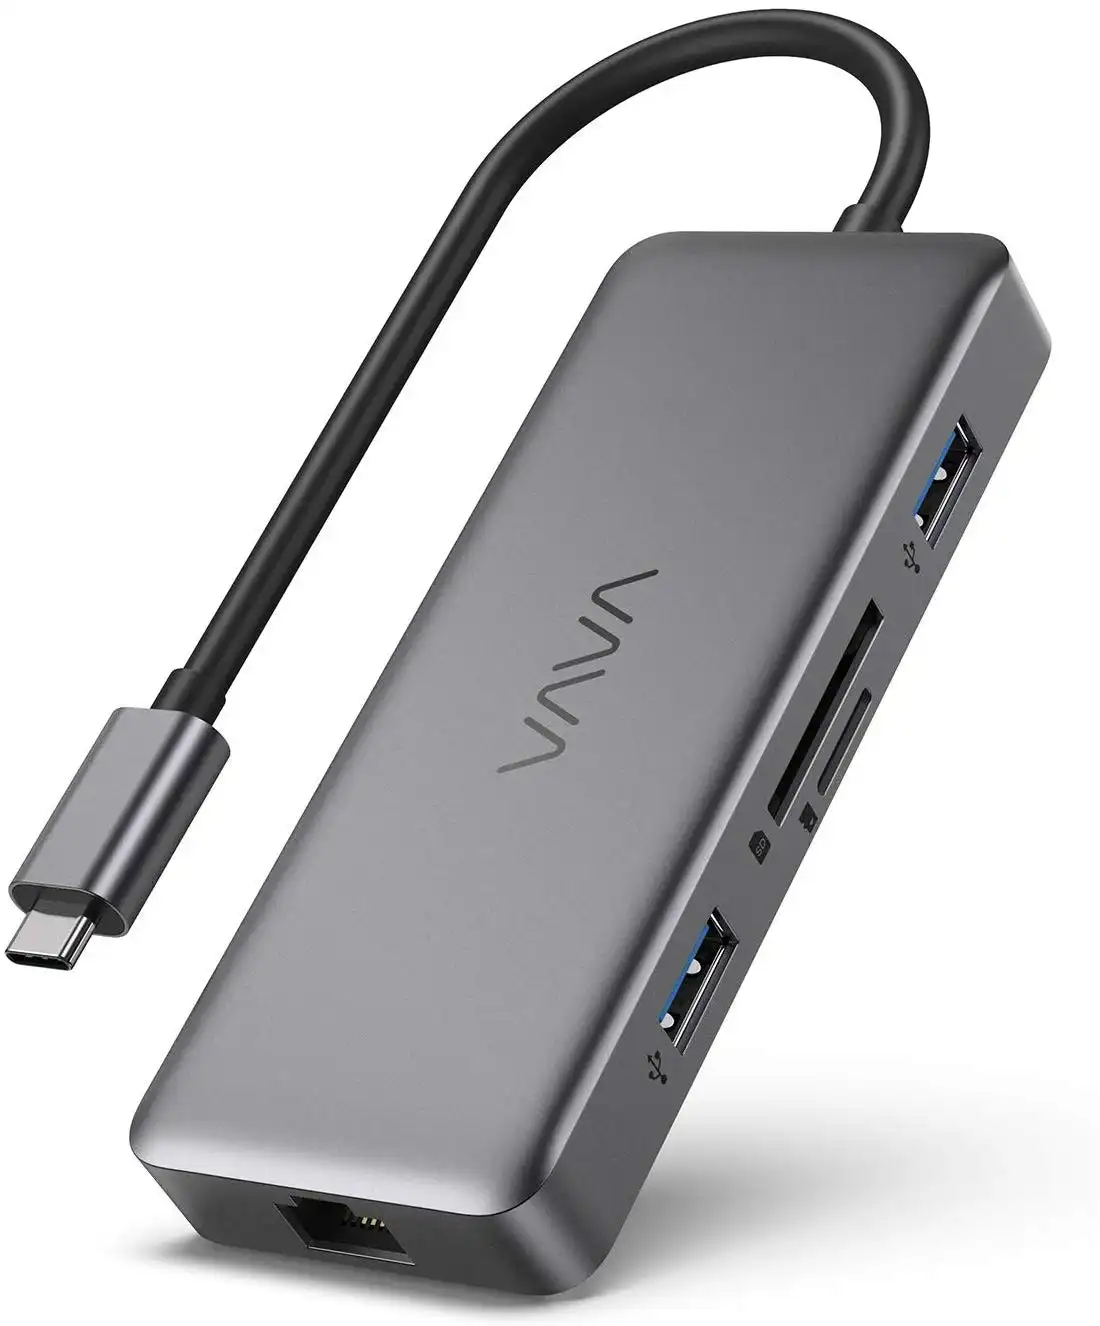 VAVA USB C Hub, 8-in-1 USB C Adapter with 4K HDMI, 1Gbps RJ45 Ethernet Port, USB 3.0, SD/TF Card Reader, 100W Pd Charging Port for MacBook/Pro/Air and